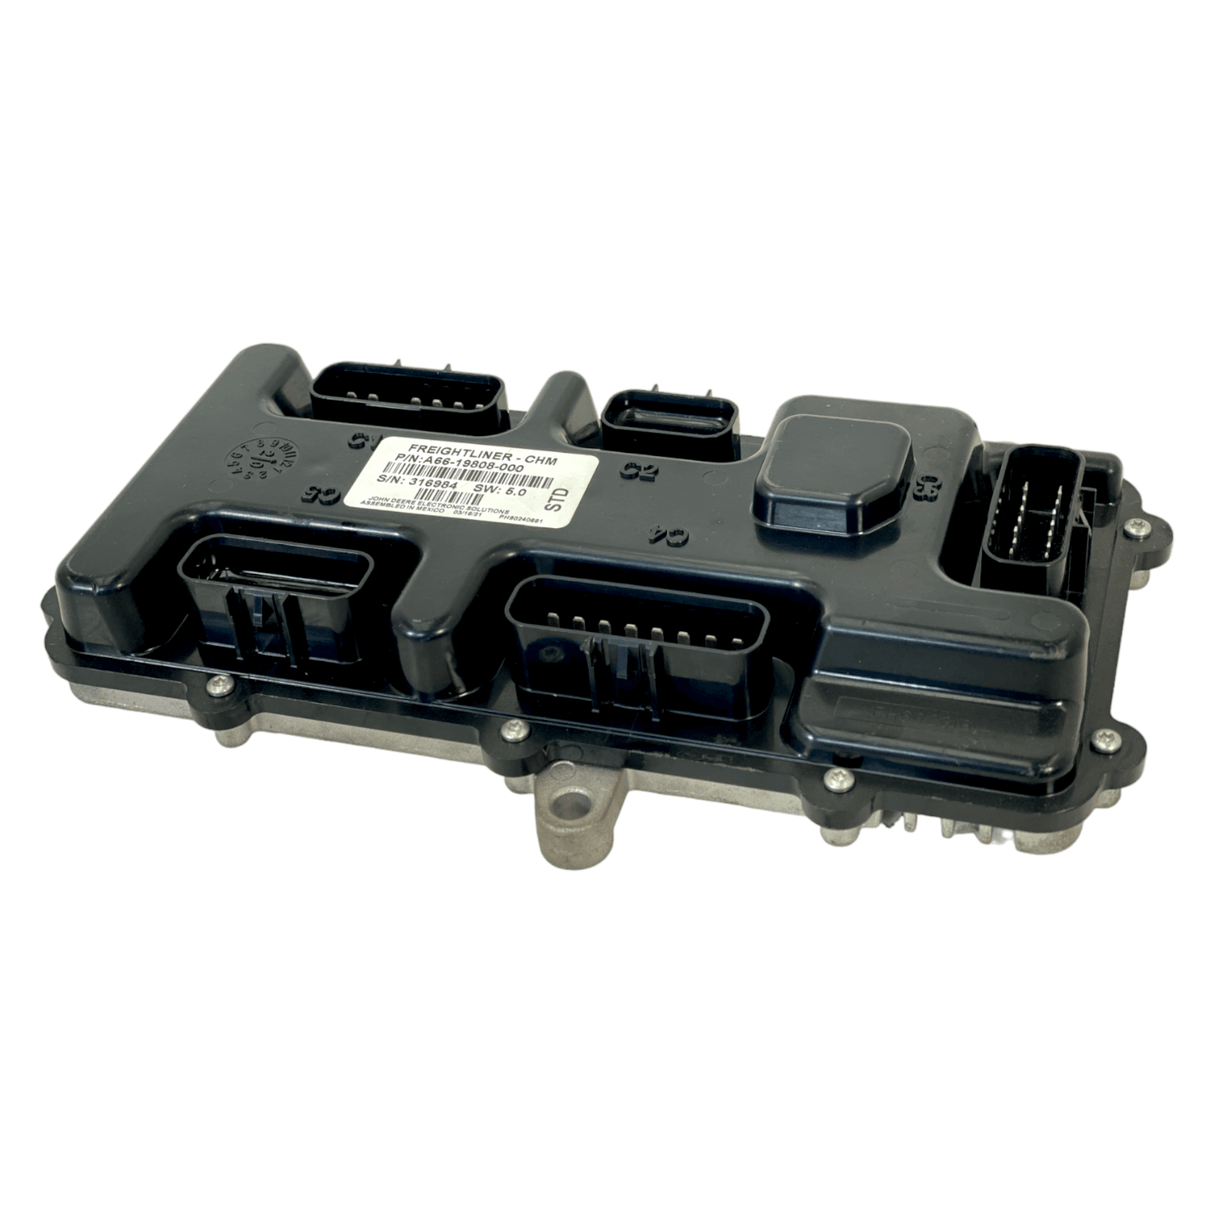 A66-19808-000 Oem Freightliner Module Exm No Core Charge.